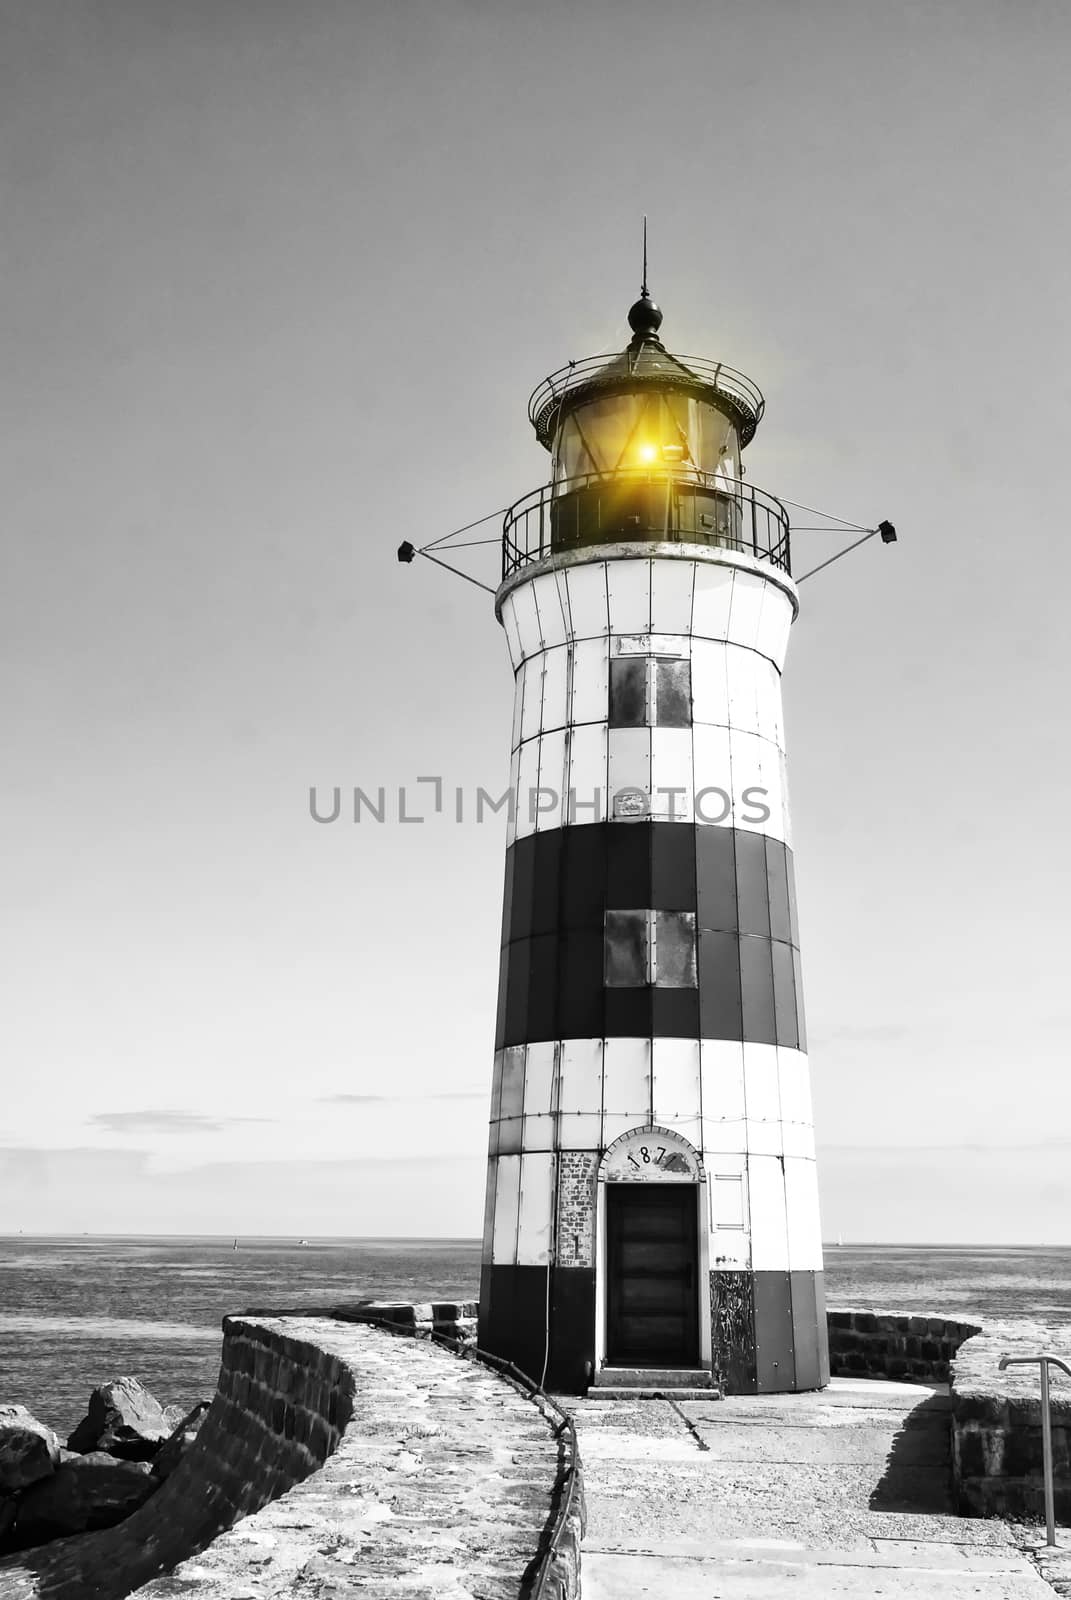 Lighthouse Schleimuende North, on the Baltic Sea by Fr@nk